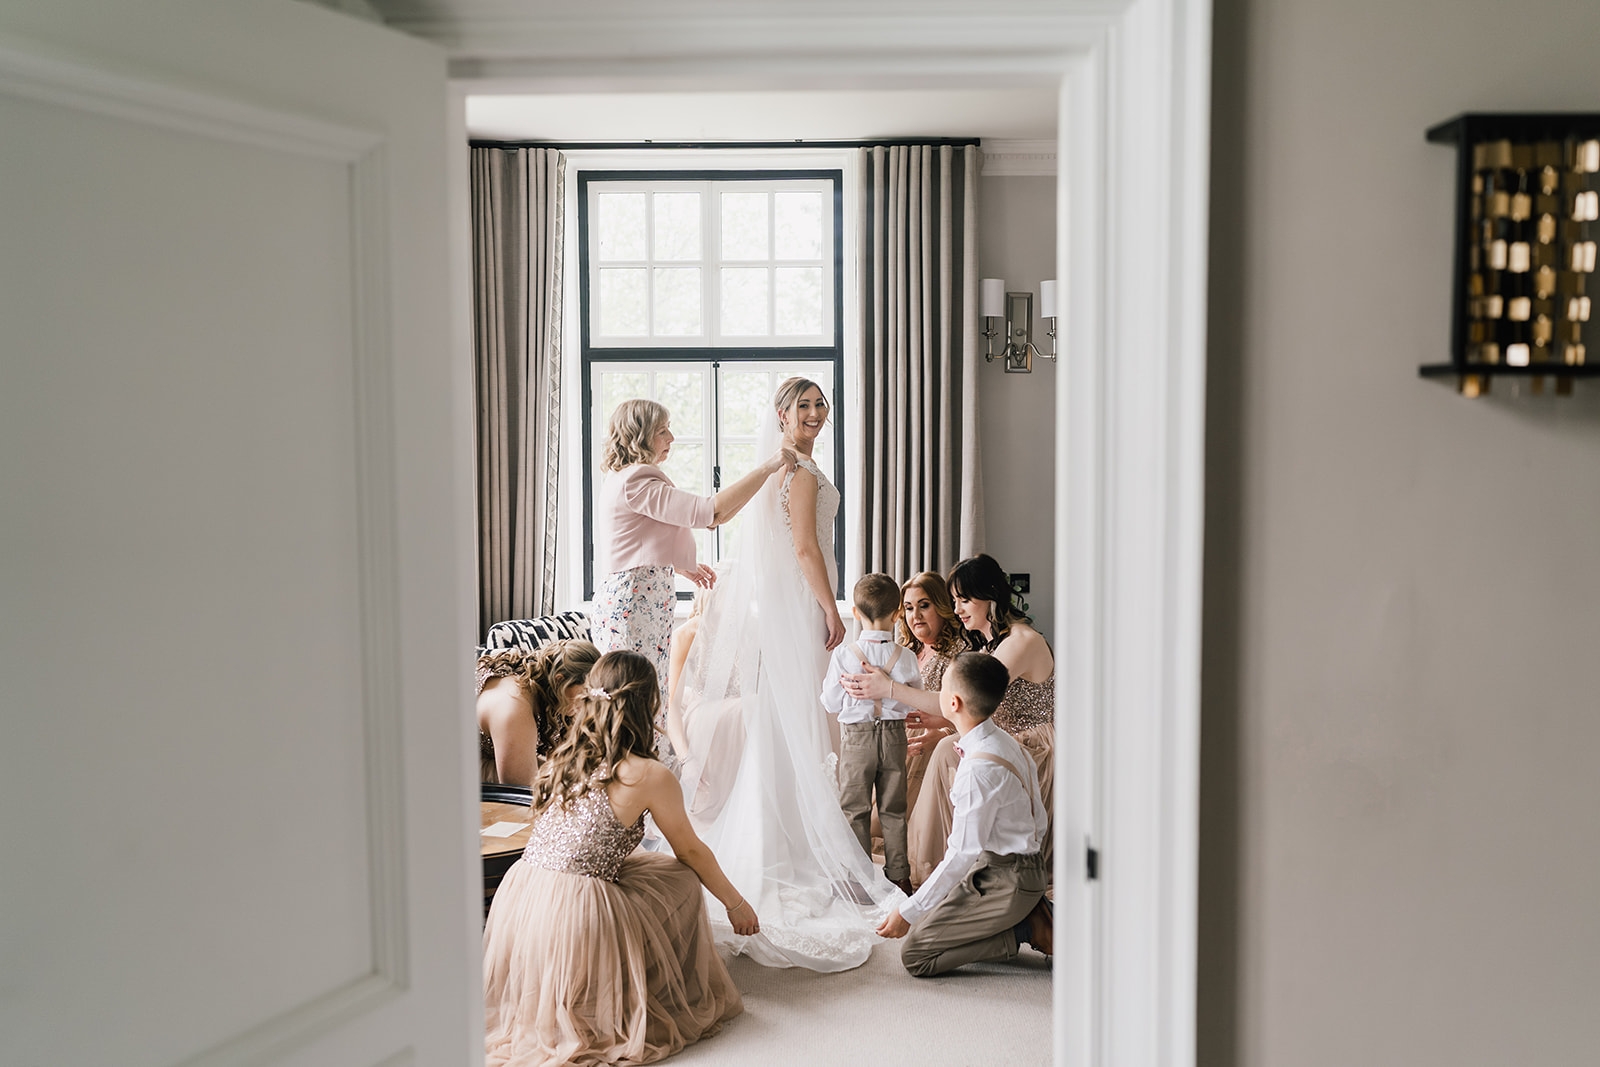 Bride and her bridal party getting ready